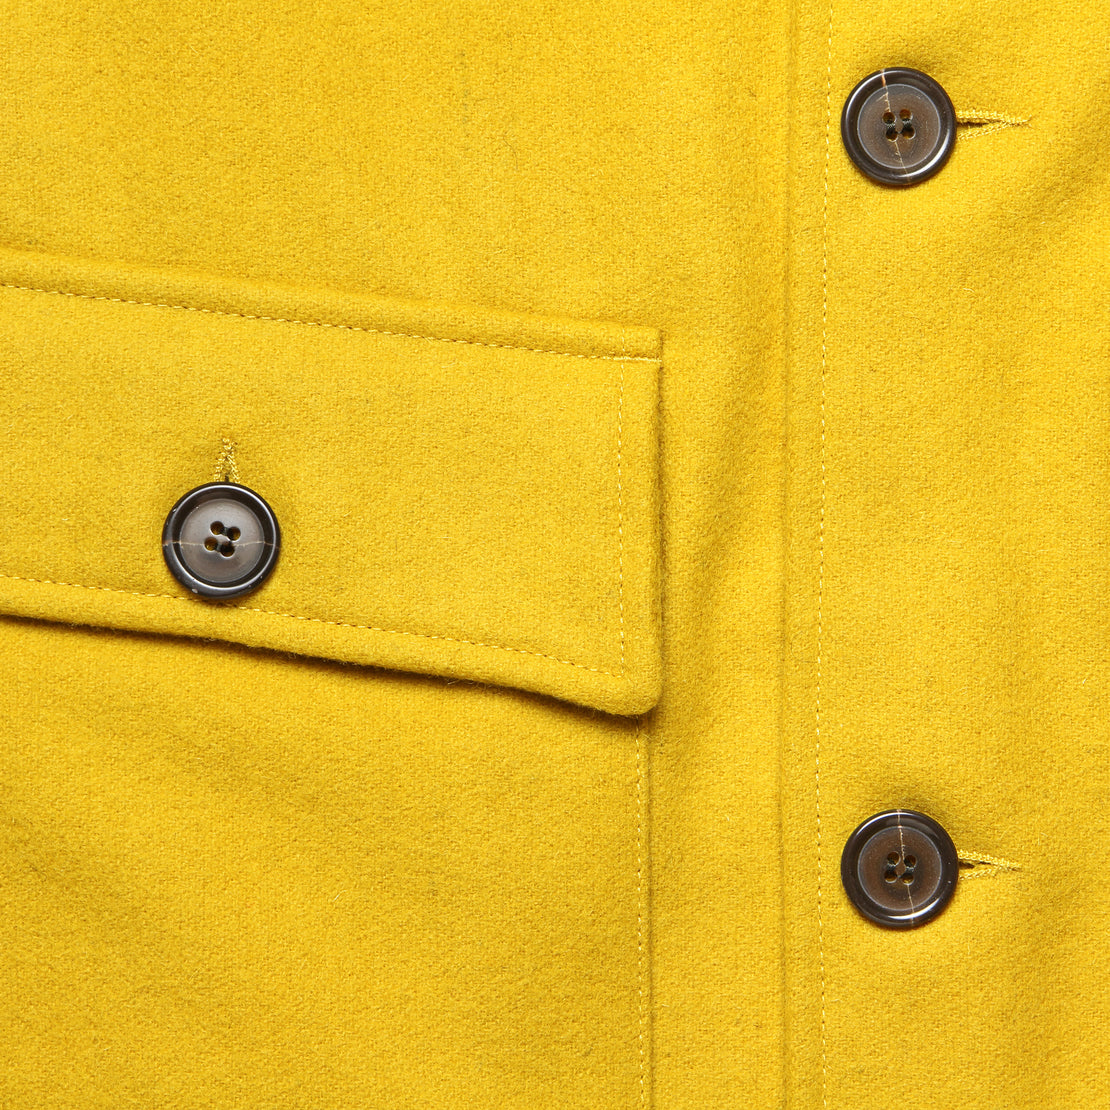 Strummer Jacket - Yellow Melton - Universal Works - STAG Provisions - Outerwear - Coat / Jacket